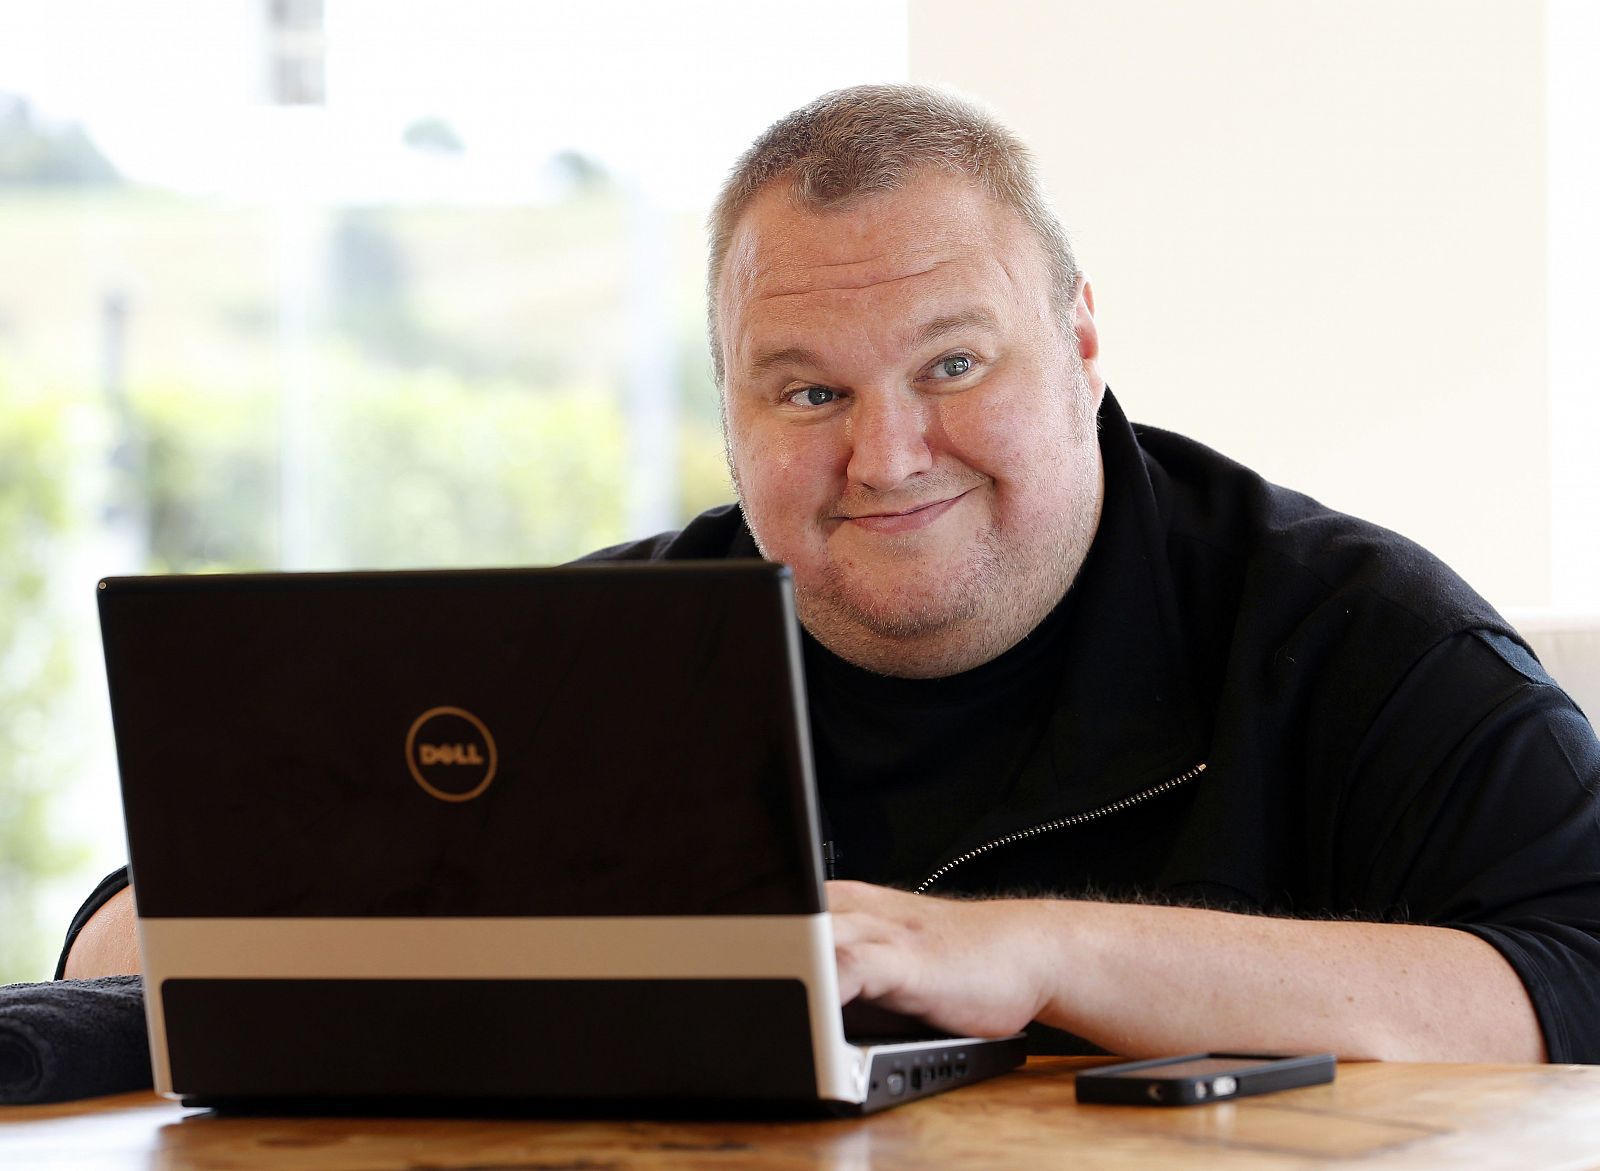 Kim Dotcom smiles during an interview with Reuters in Auckland